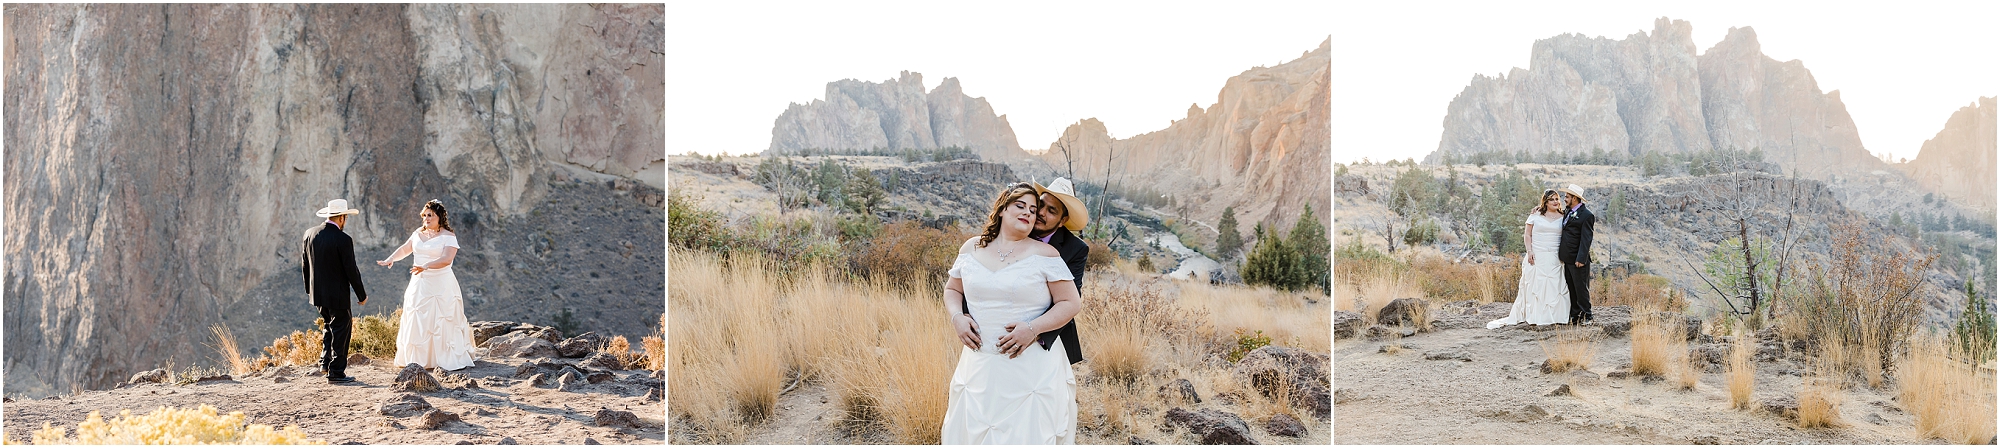 A Latino groom in a cowboy hat wraps his arm around his gorgeous bride at their Smith Rock ceremony as they elope in Bend, Oregon. | Erica Swantek Photography